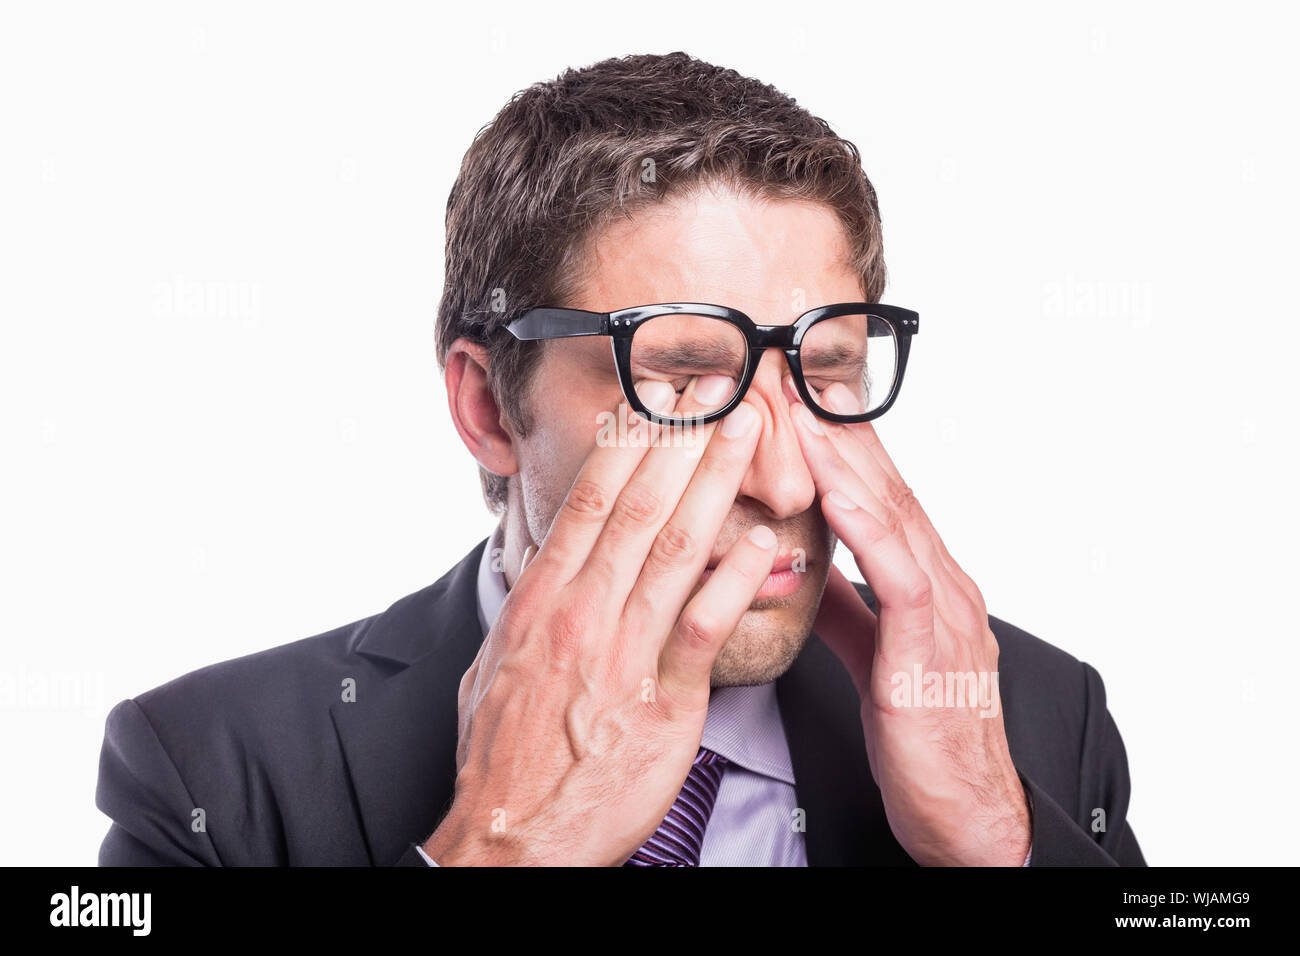 Close-up of a worried businessman rubbing eyes Stock Photo